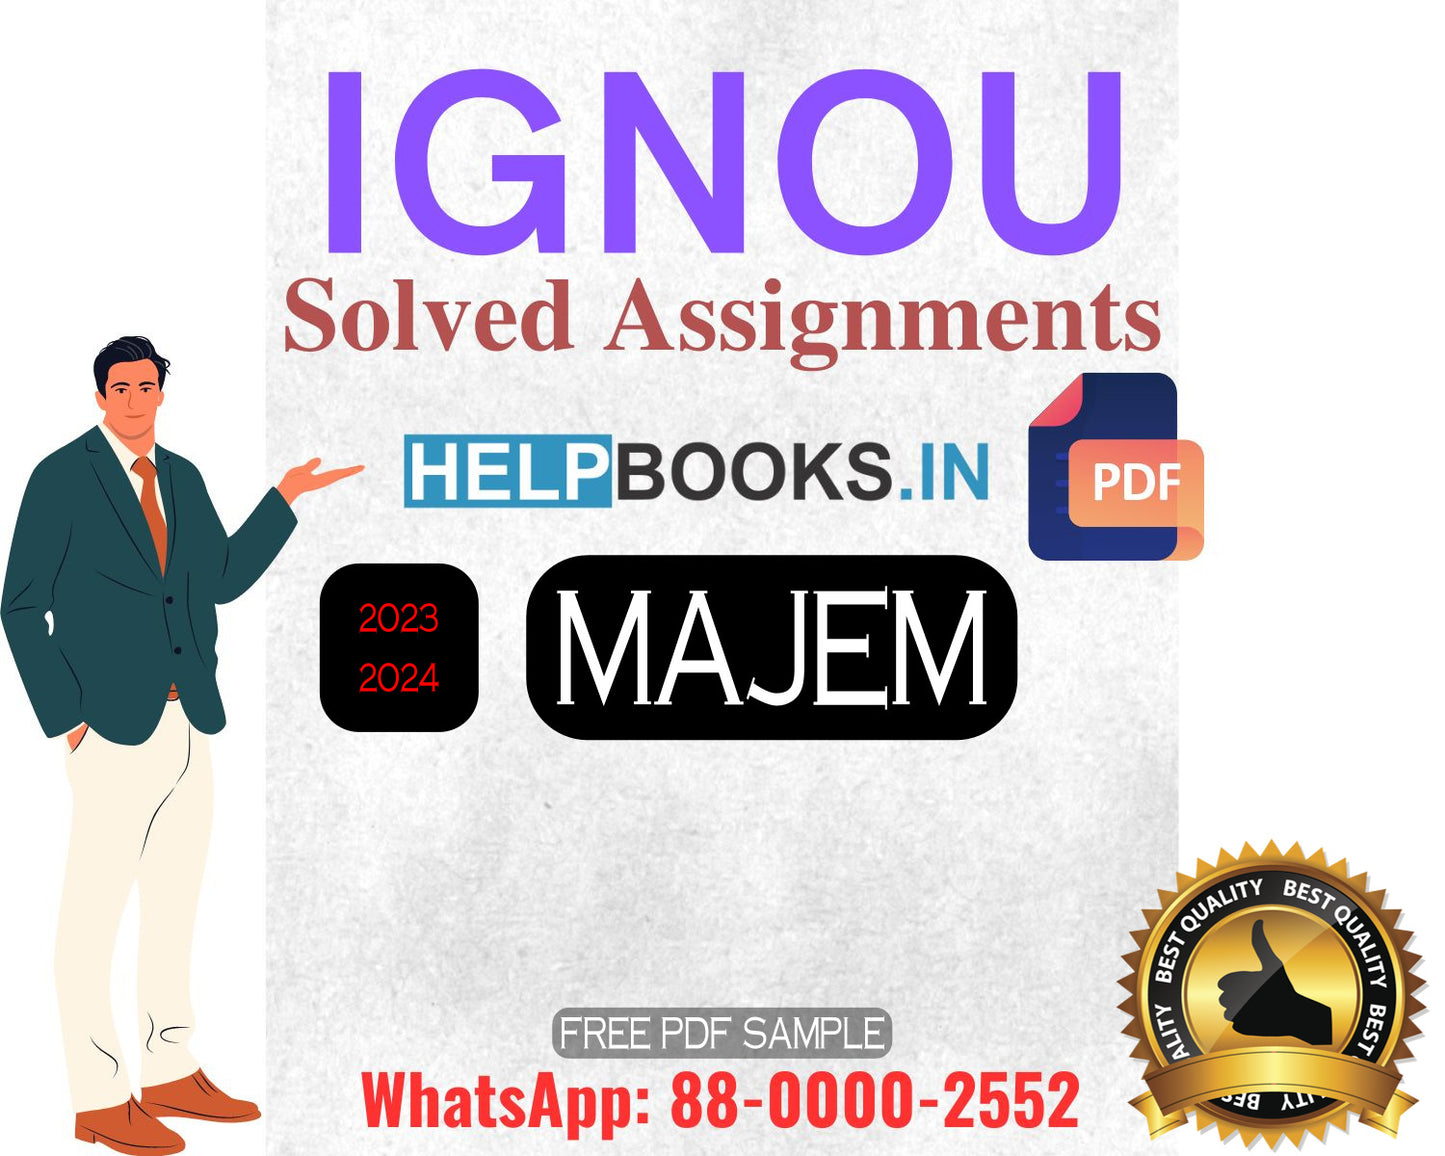 IGNOU Master's Degree Programme Latest IGNOU Solved Assignment 2023-24 : MAJEM Master of Arts Journalism and Electronic Media Solved Assignments